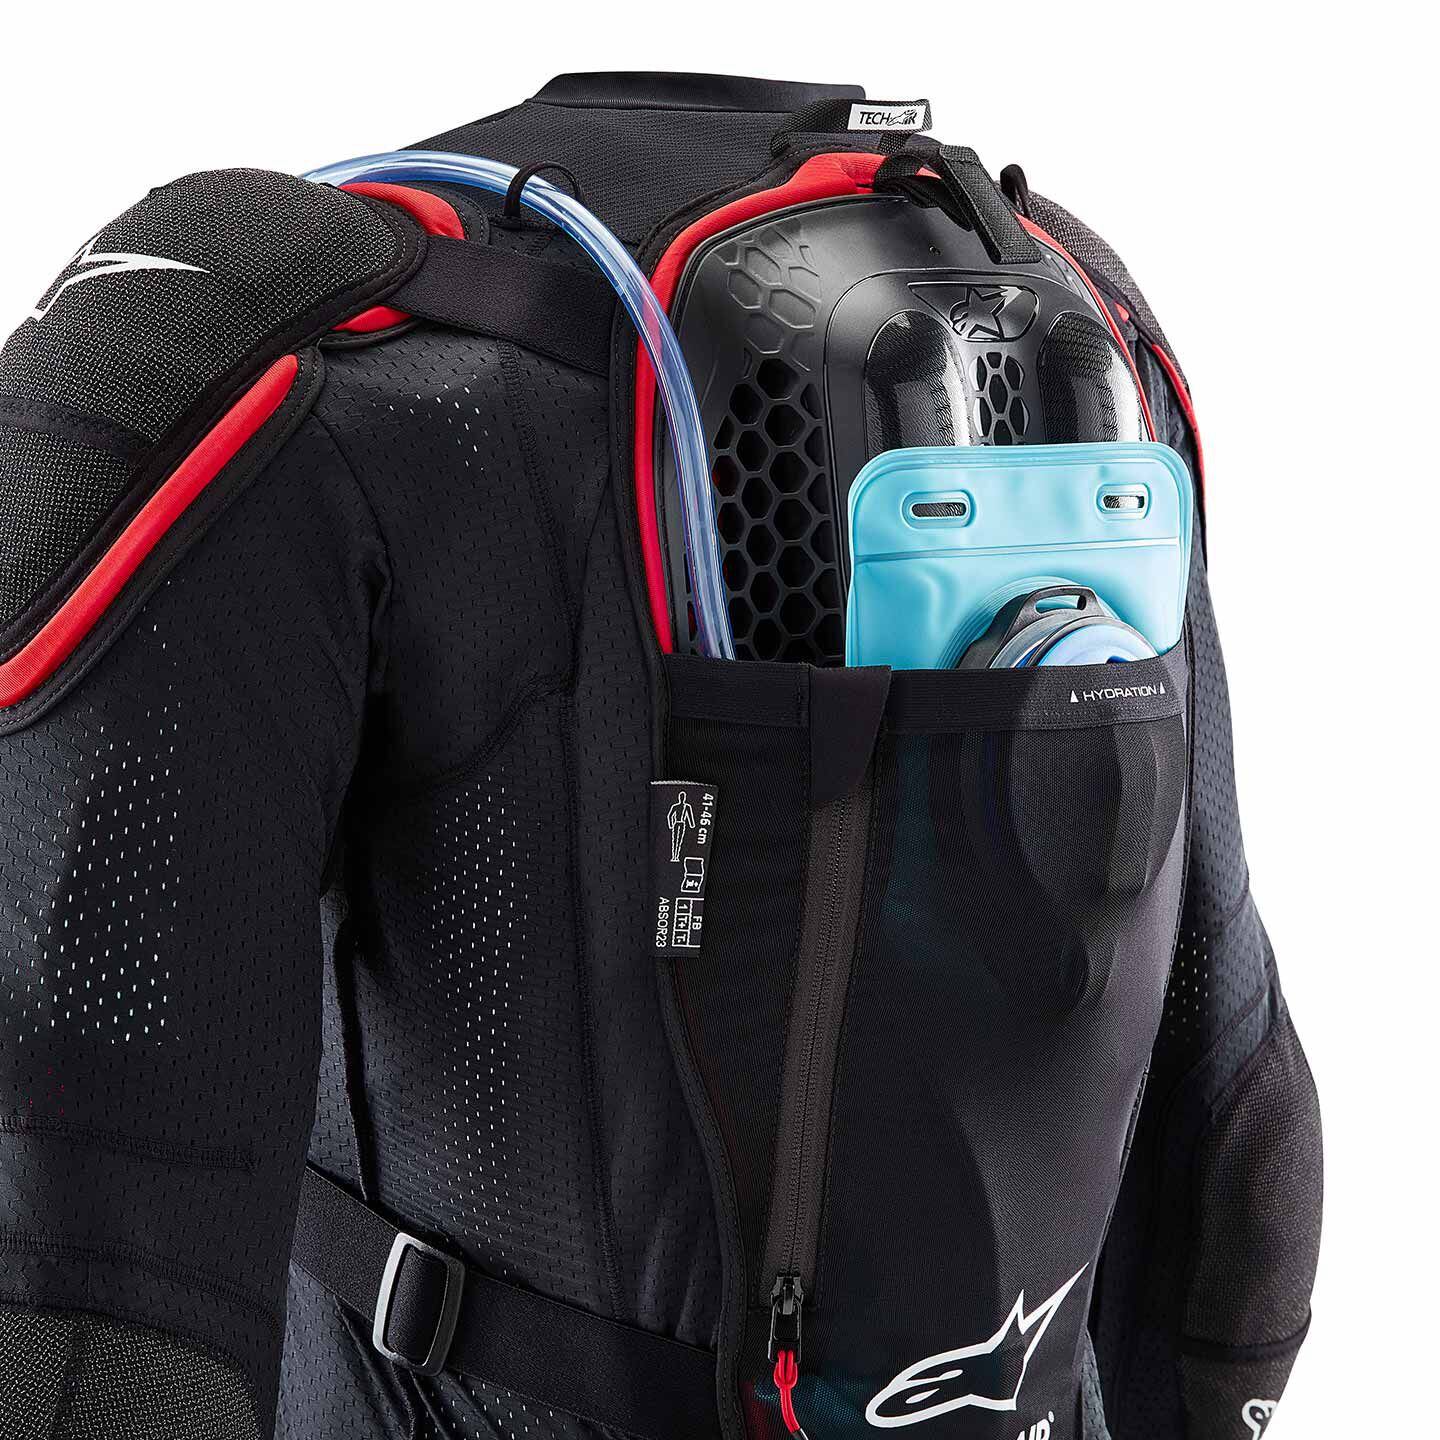 The Tech-Air off-road vest has an integrated pocket for carrying a drinking water bladder.